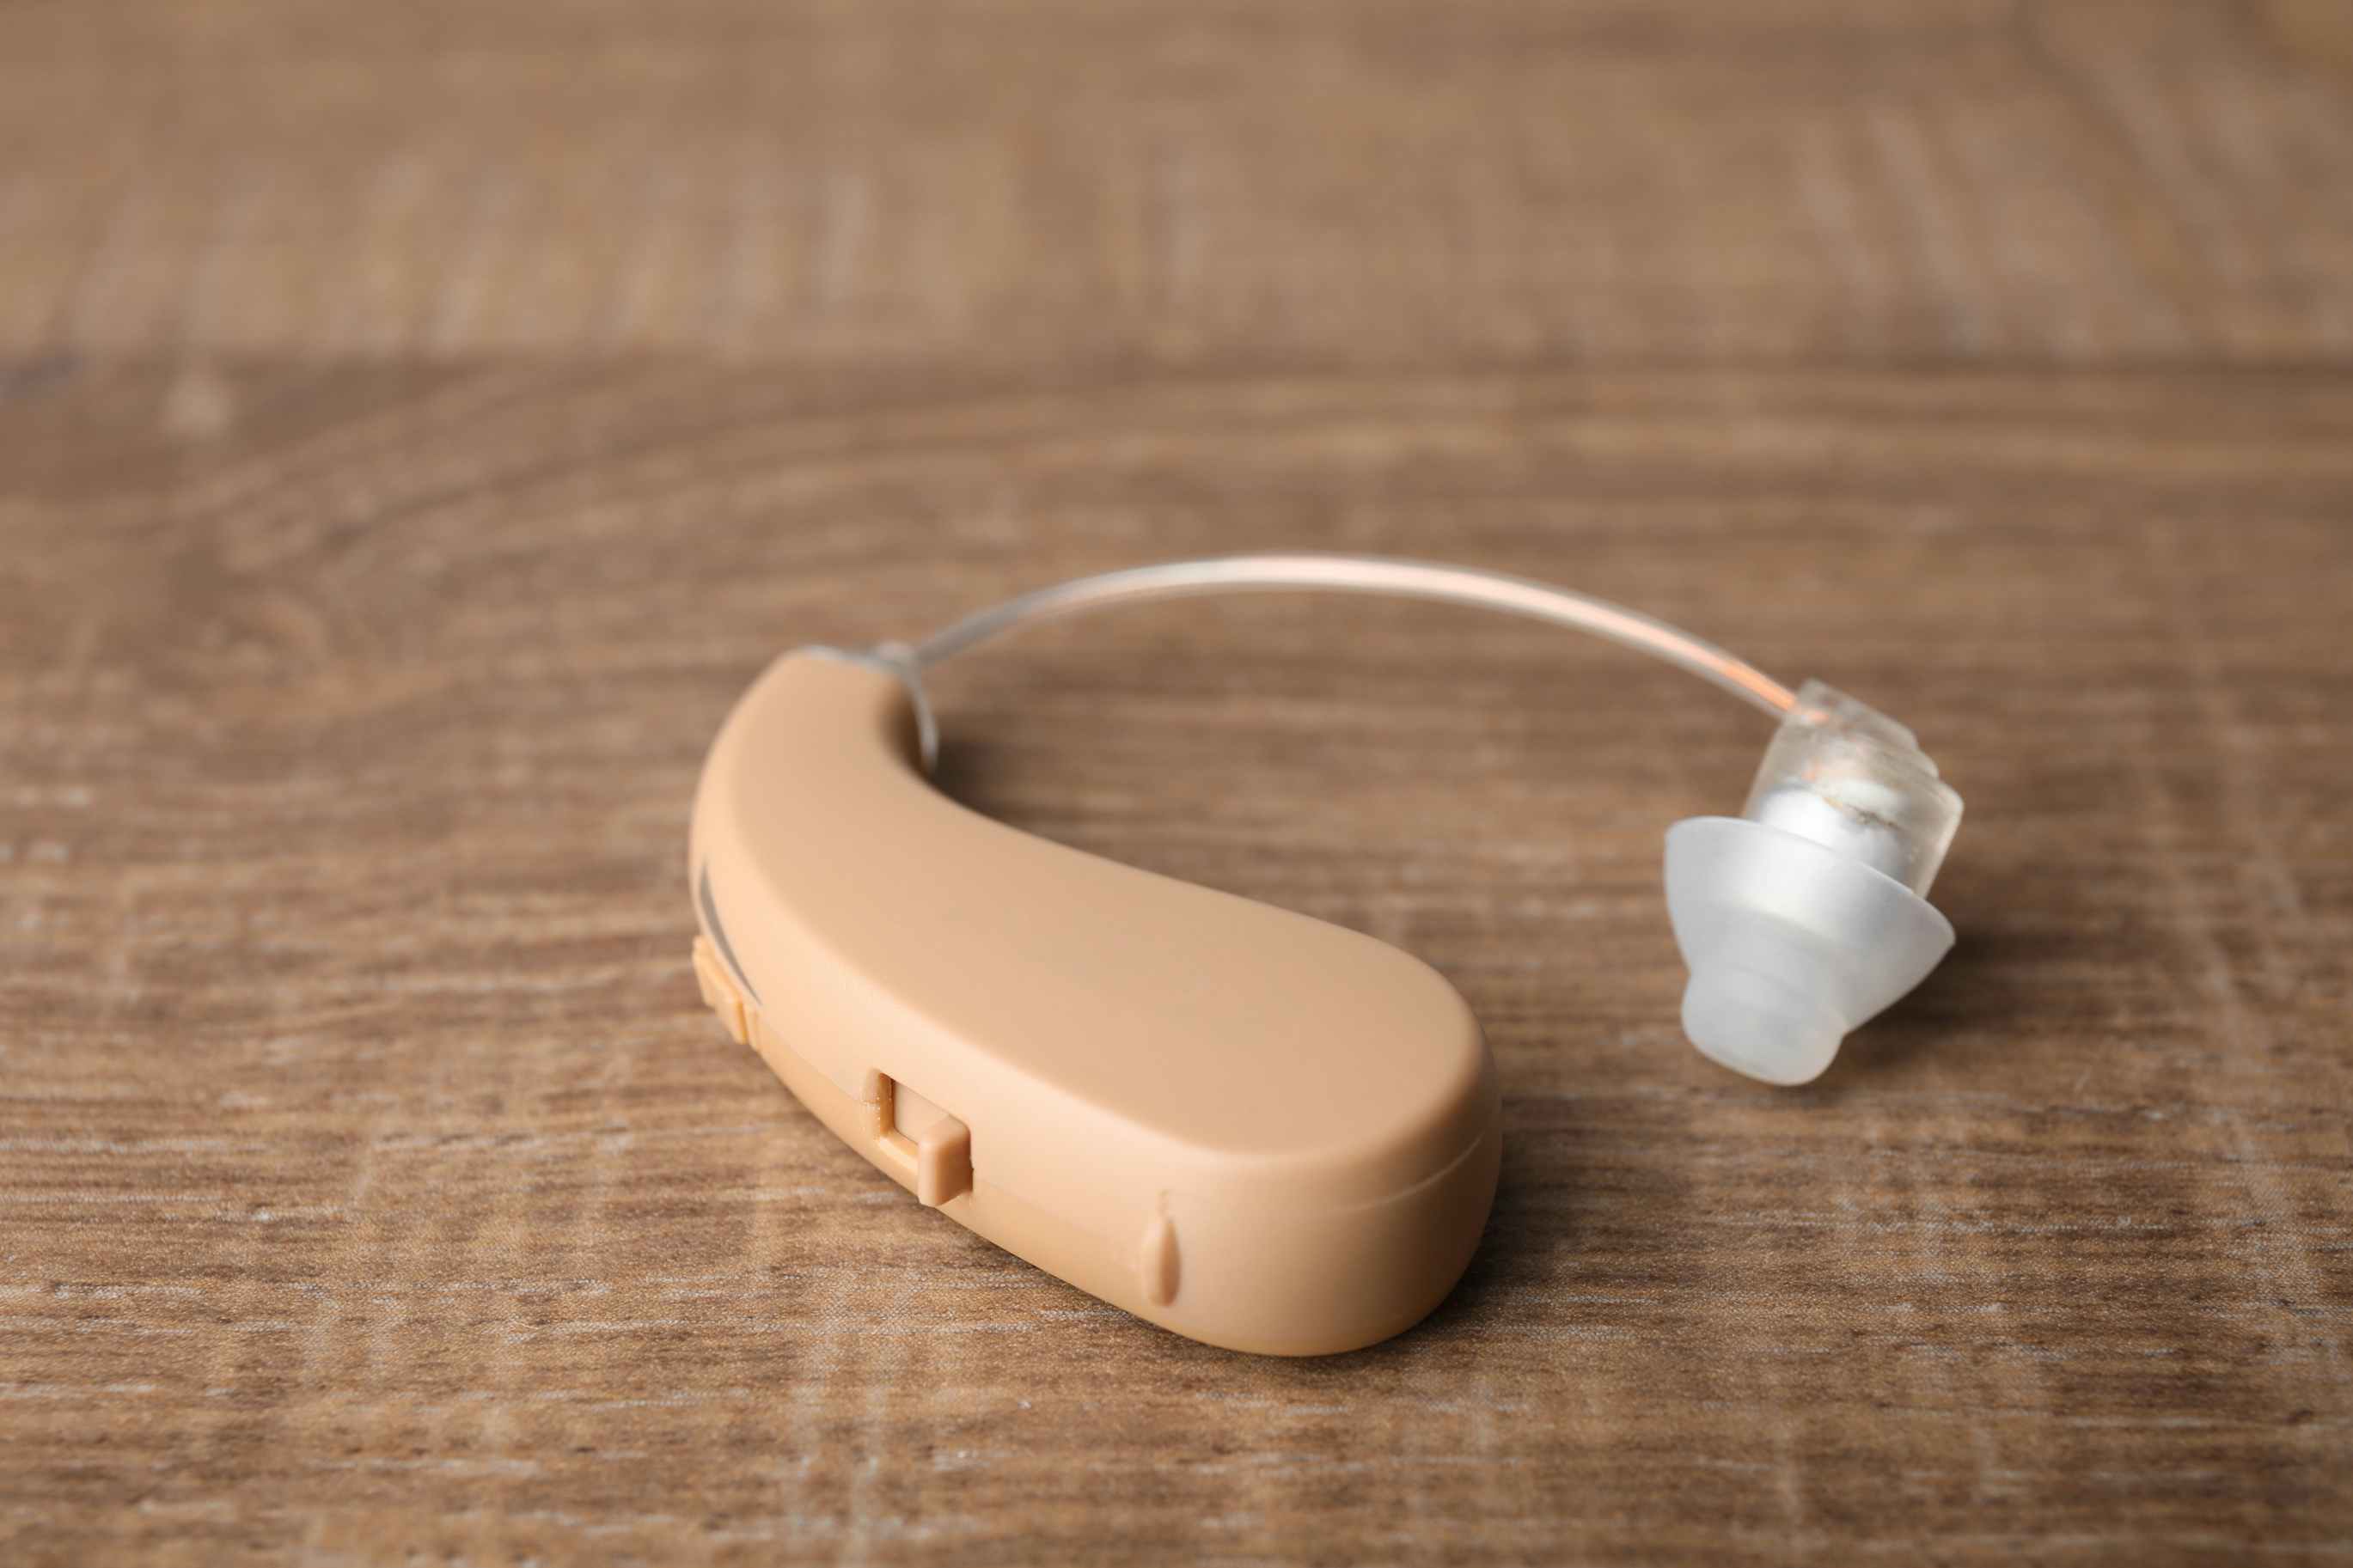 A close up of a hearing aid sitting on a wood table top.